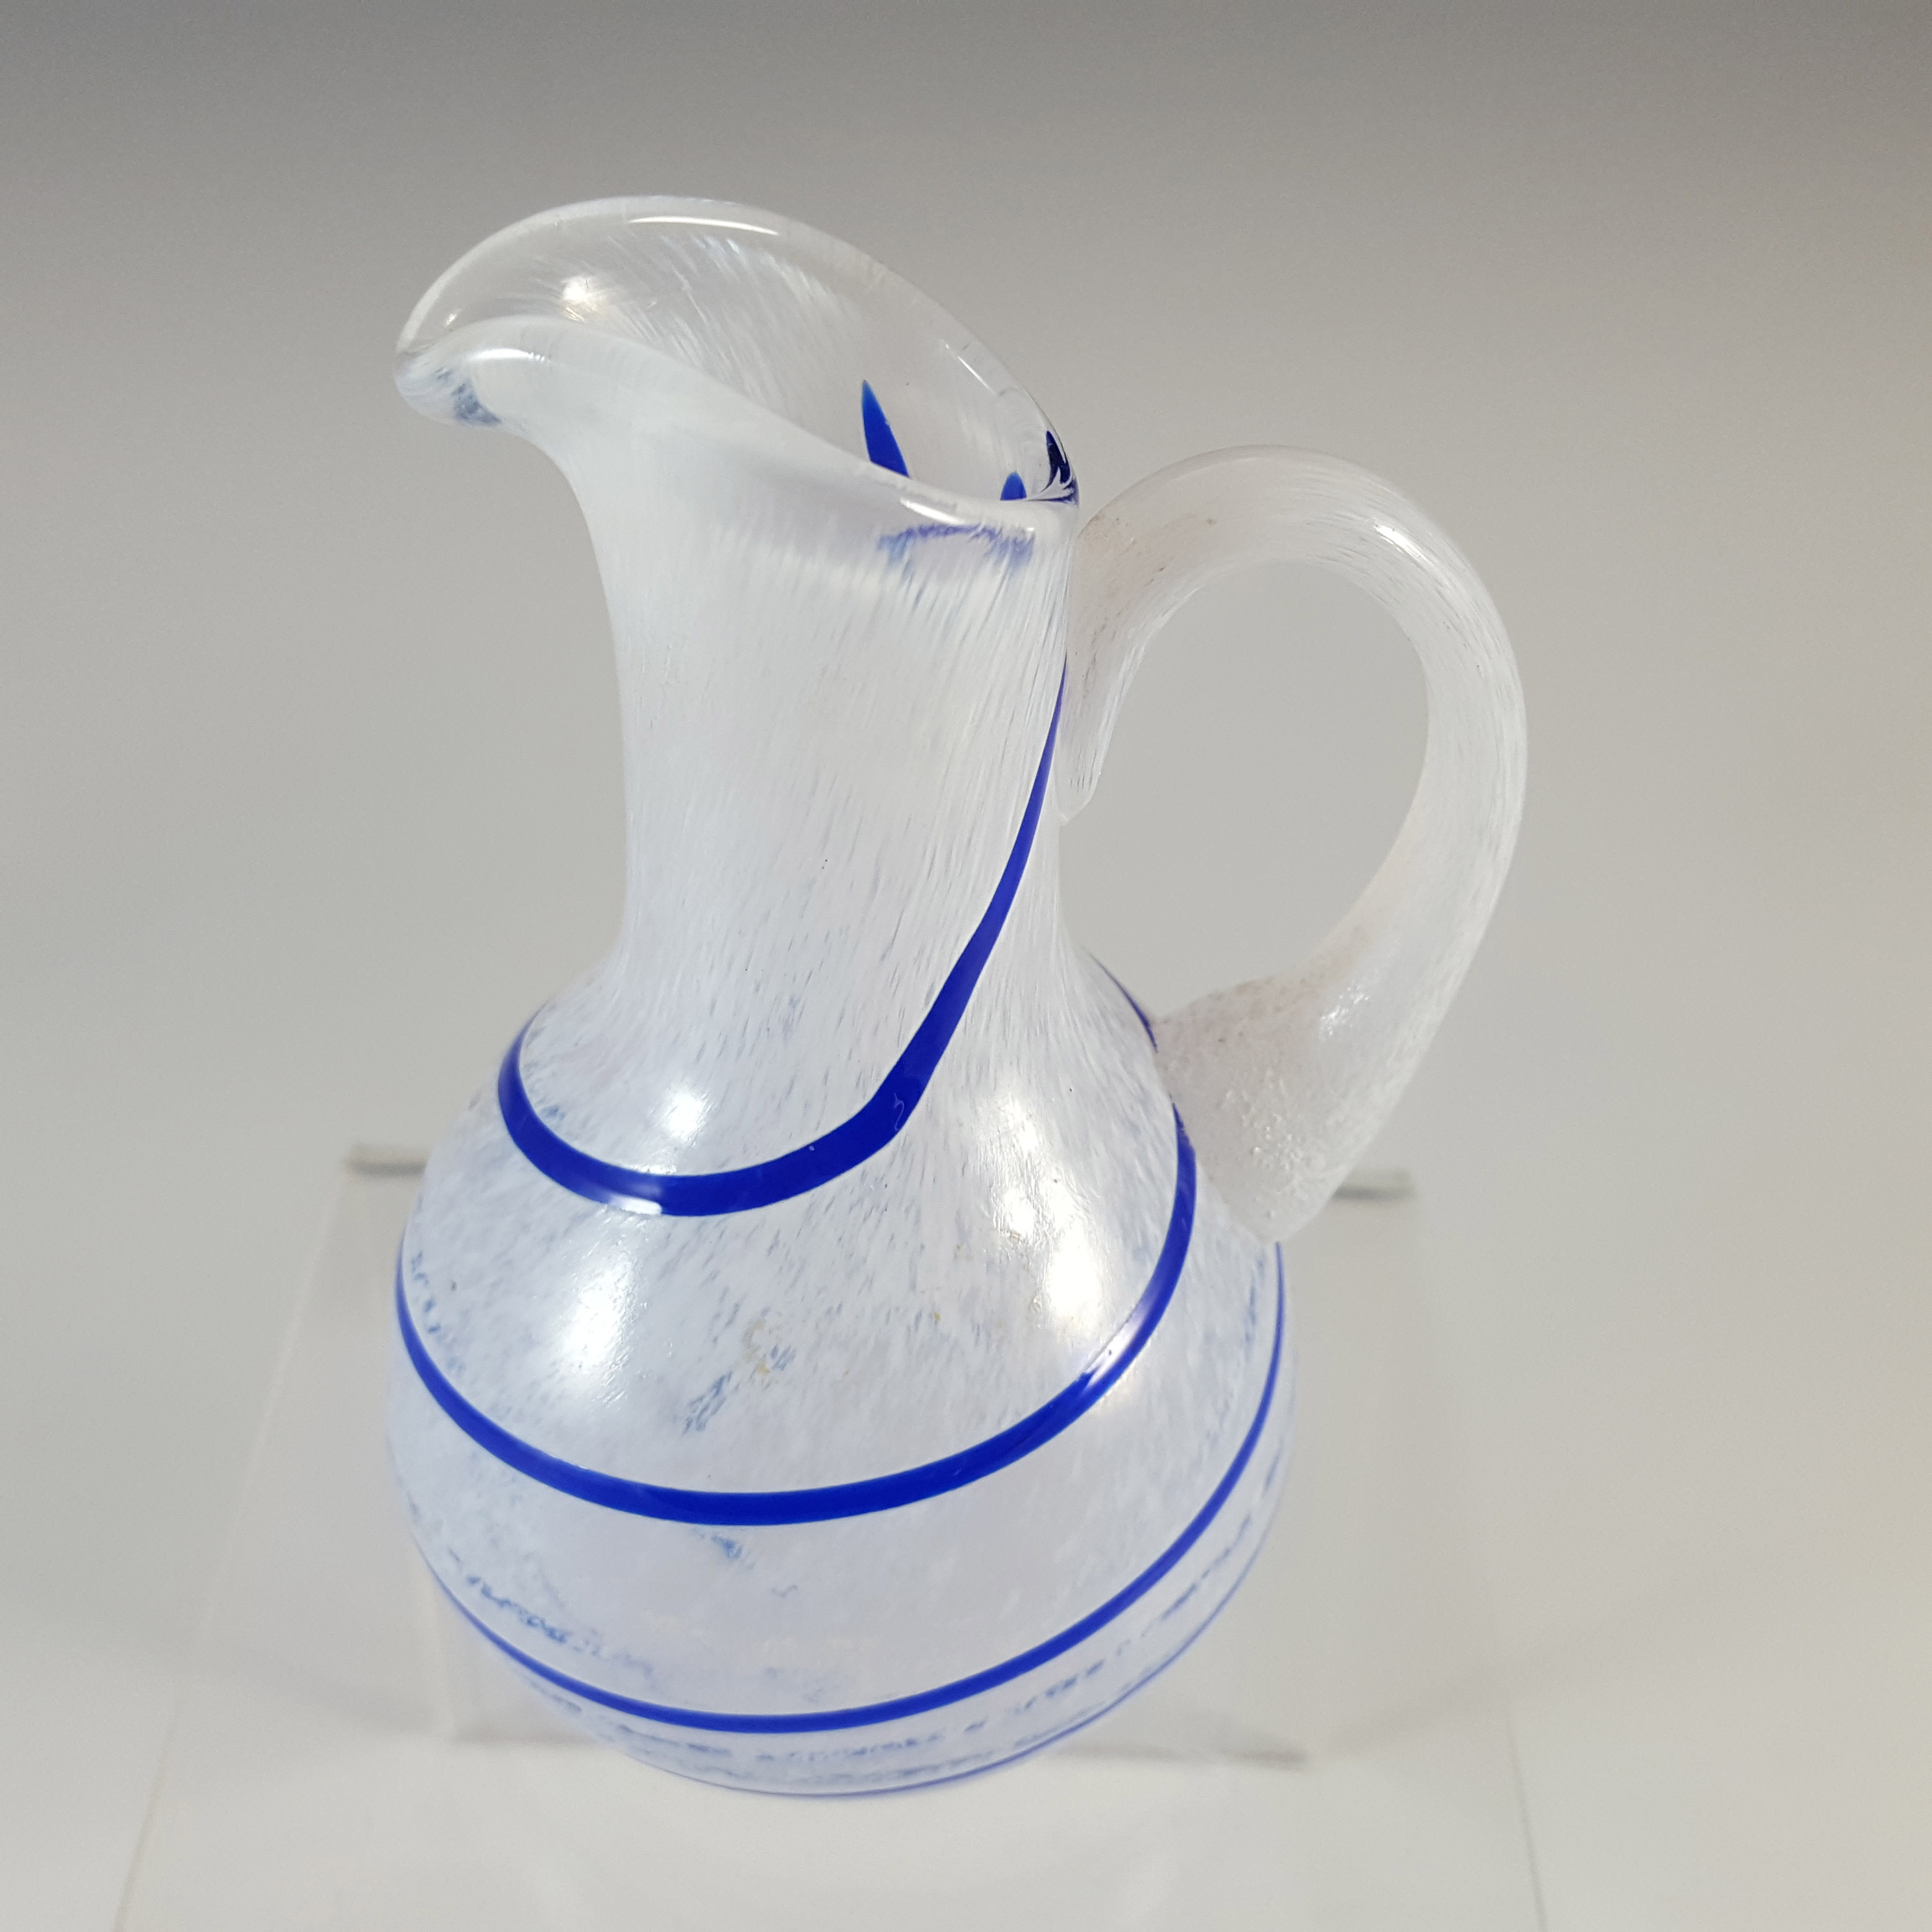 SIGNED Kosta Boda Glass Creamer Jug by Ulrica Vallien #88012 - Click Image to Close